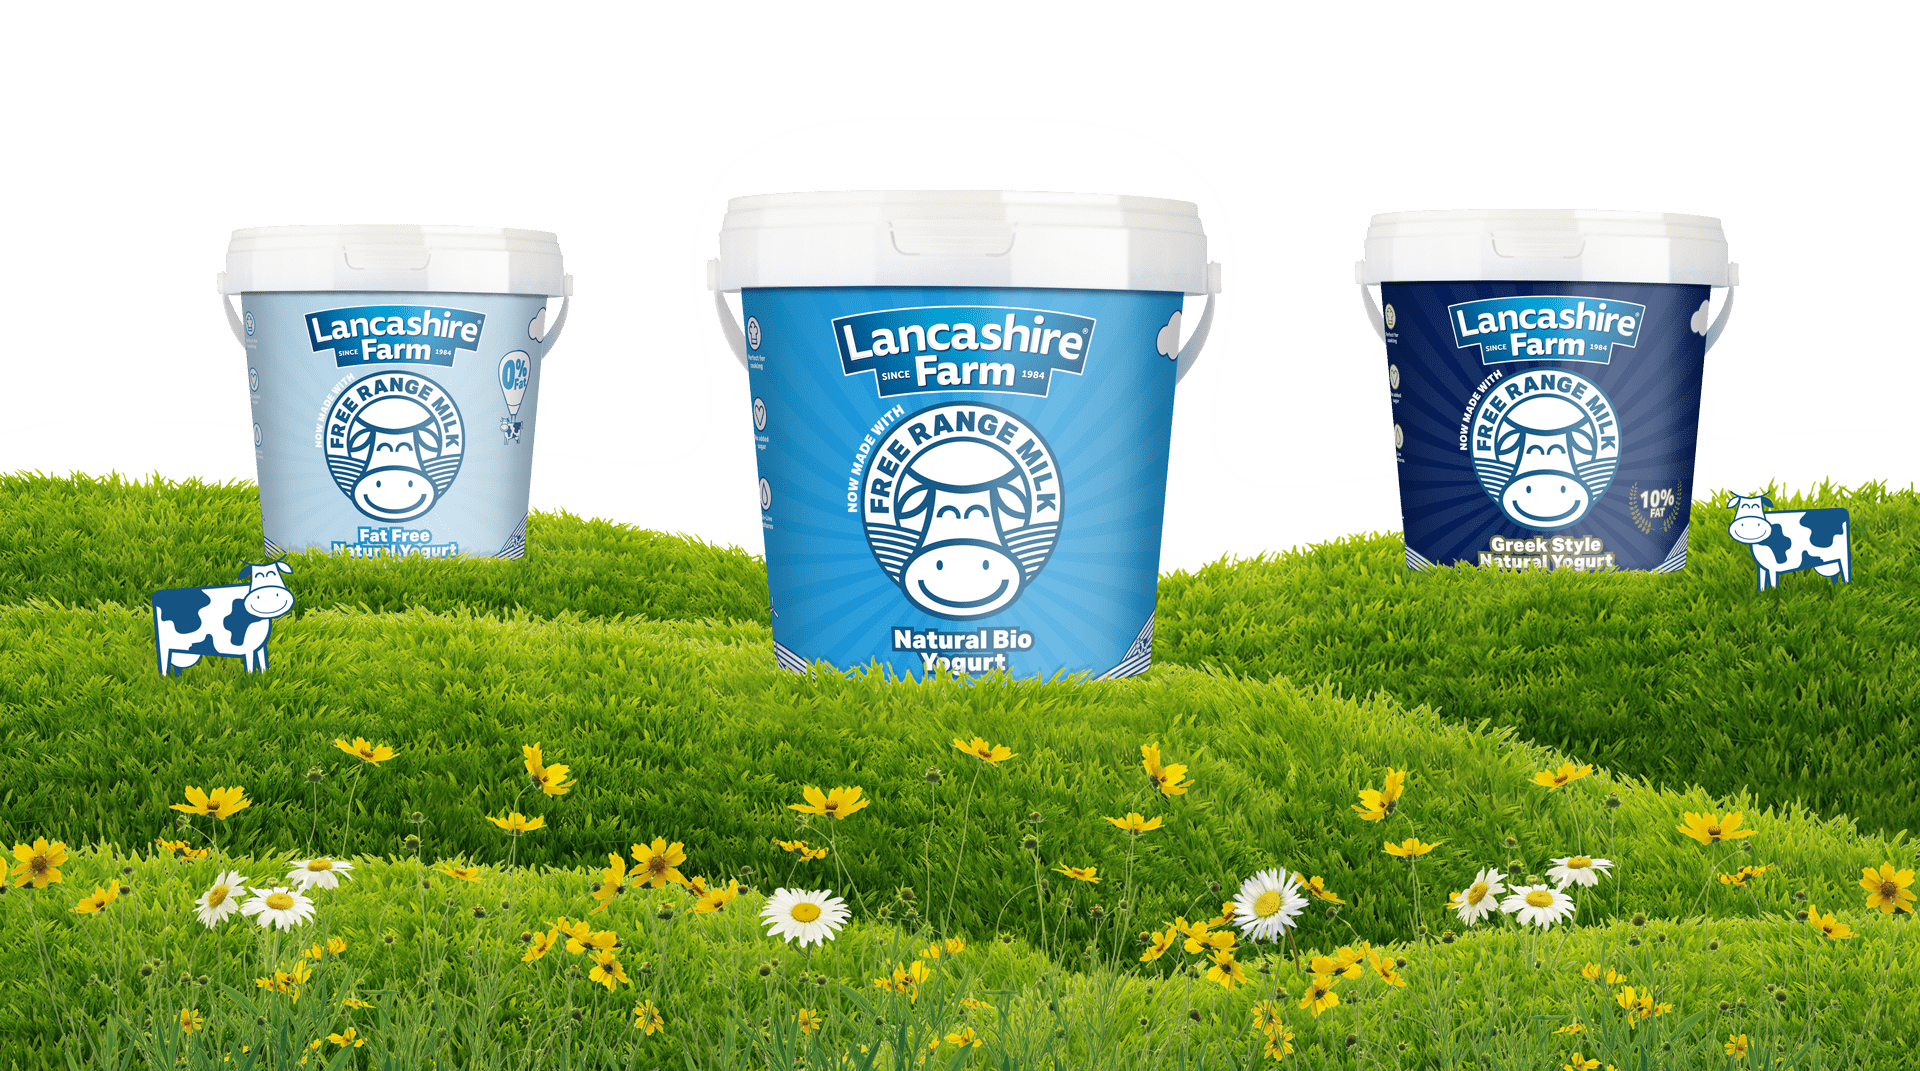 Here we have the Lancashire Farm Natural Bio, Fat Free and Greek style kilo yogurt pots sitting on top of the rolling hills of Lancashire.